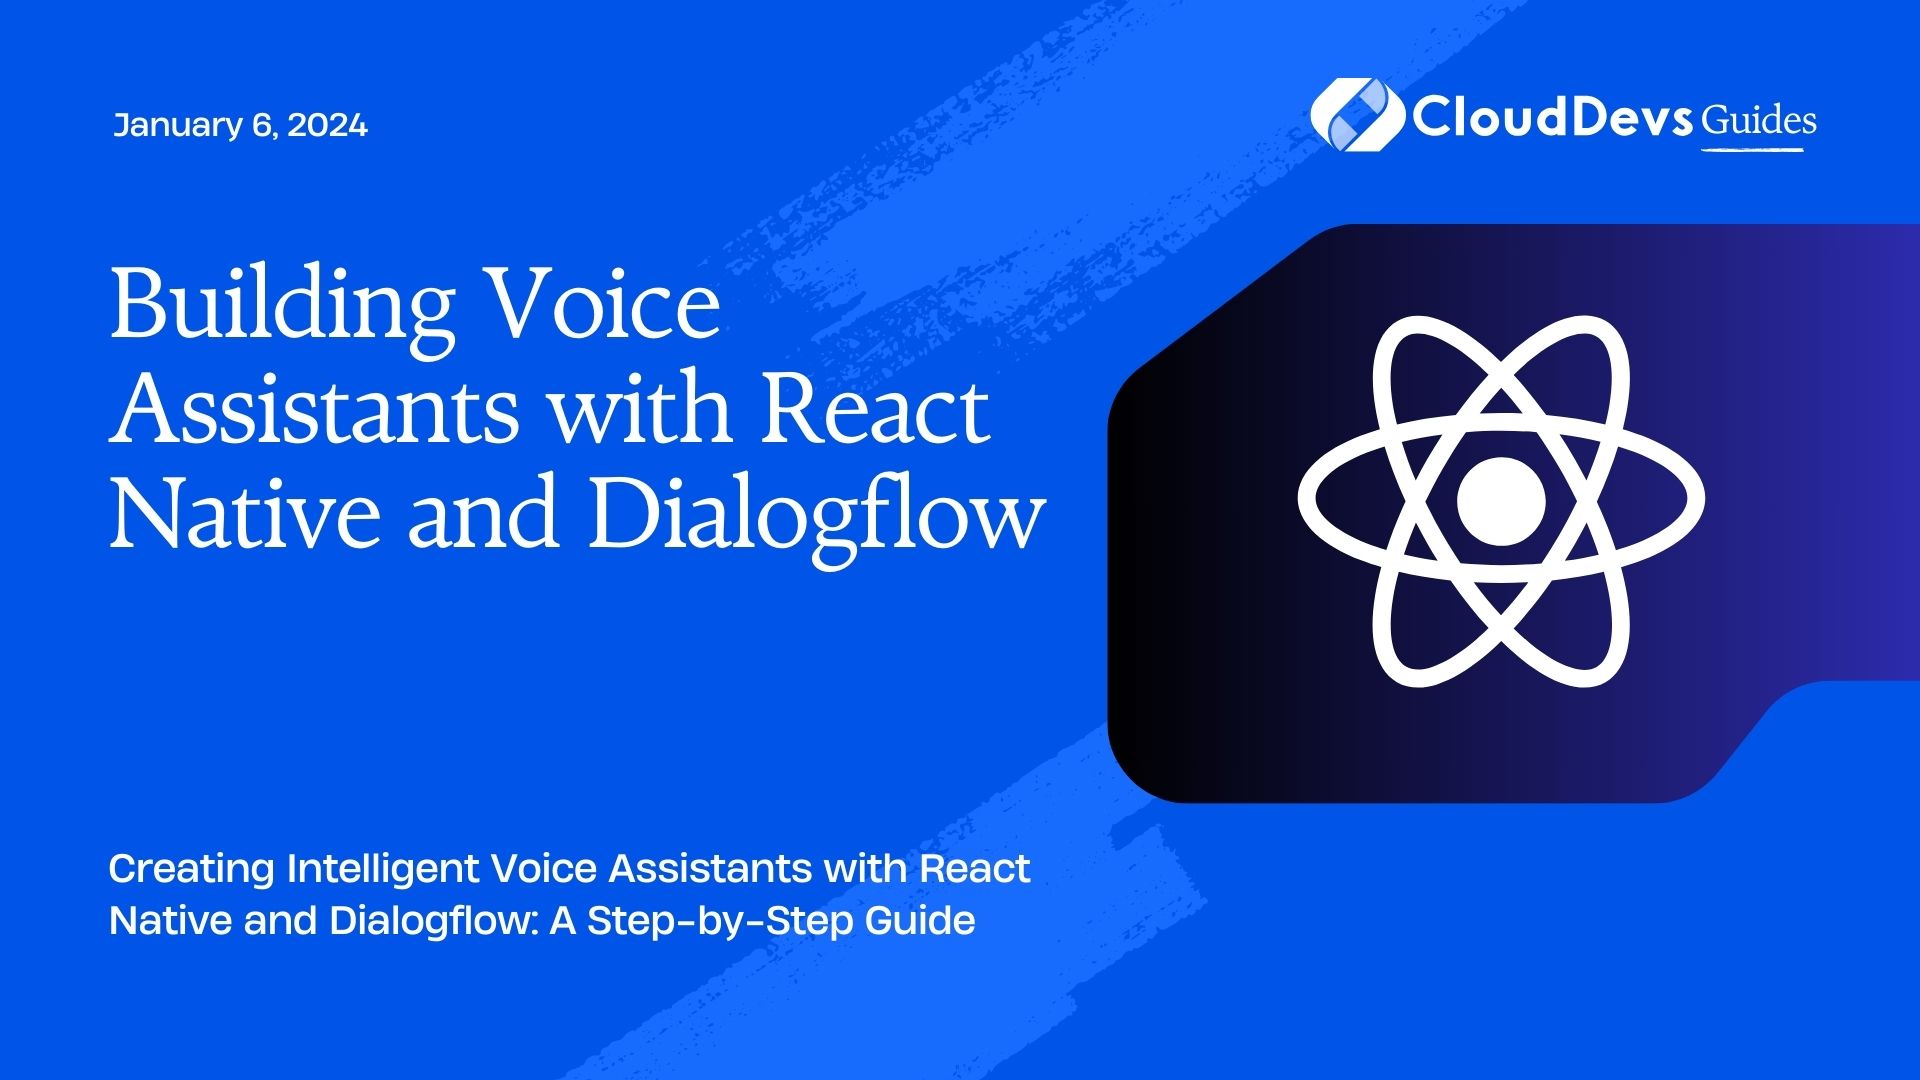 Building Voice Assistants with React Native and Dialogflow